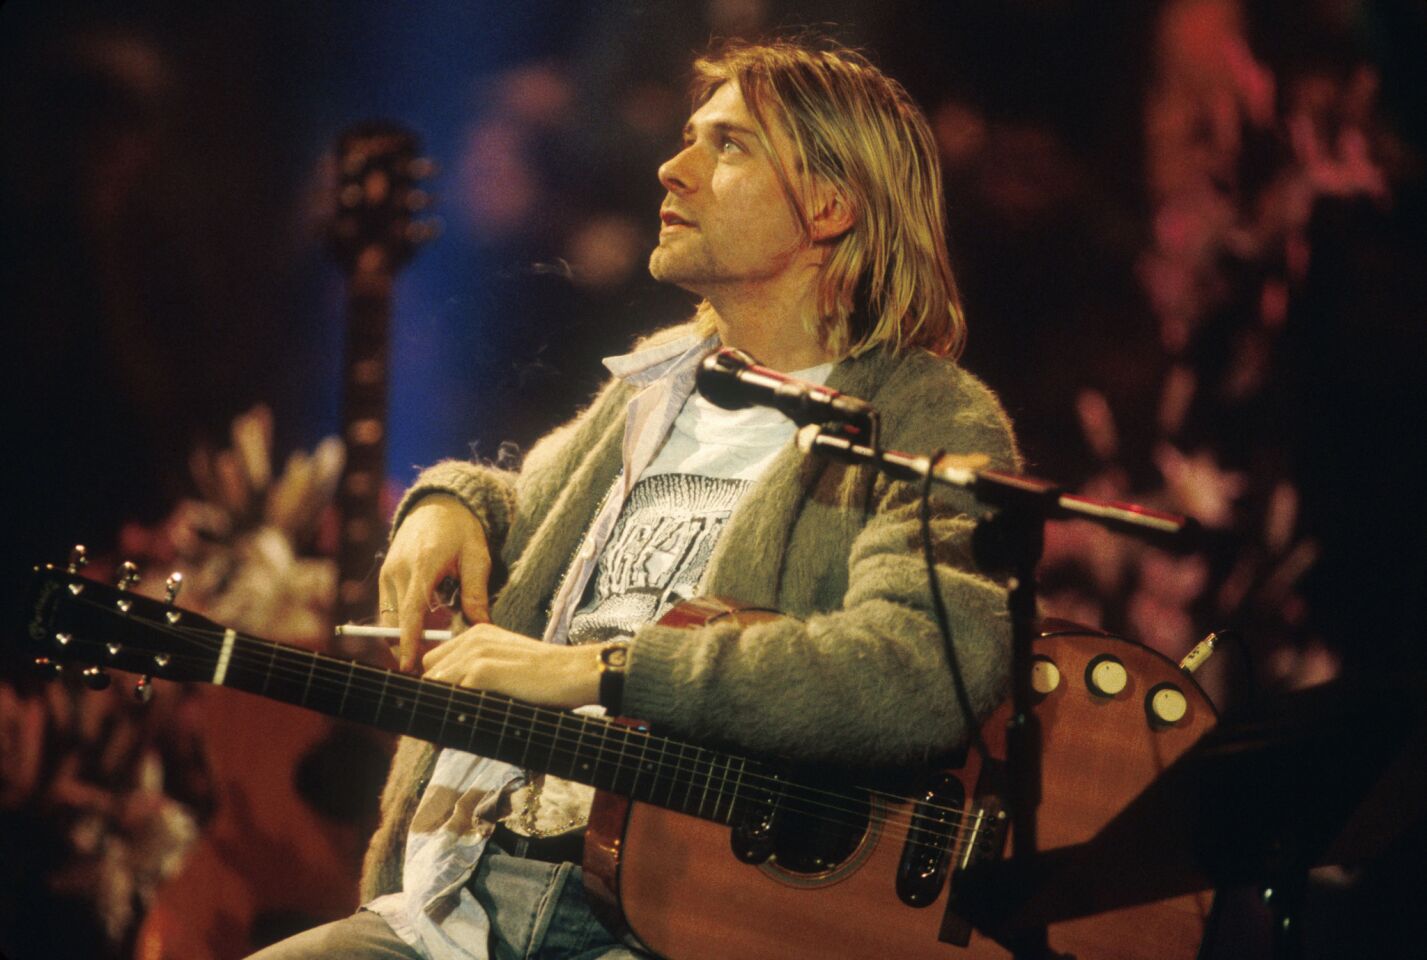 Kurt Cobain ushered in a new era in rock in the early '90s with his band Nirvana. But fame was never his intention, and it seemed to add to his suffering, brought on by depression, chronic bronchitis and heroin addiction. He died at 27 of a self-inflicted gunshot to the head.